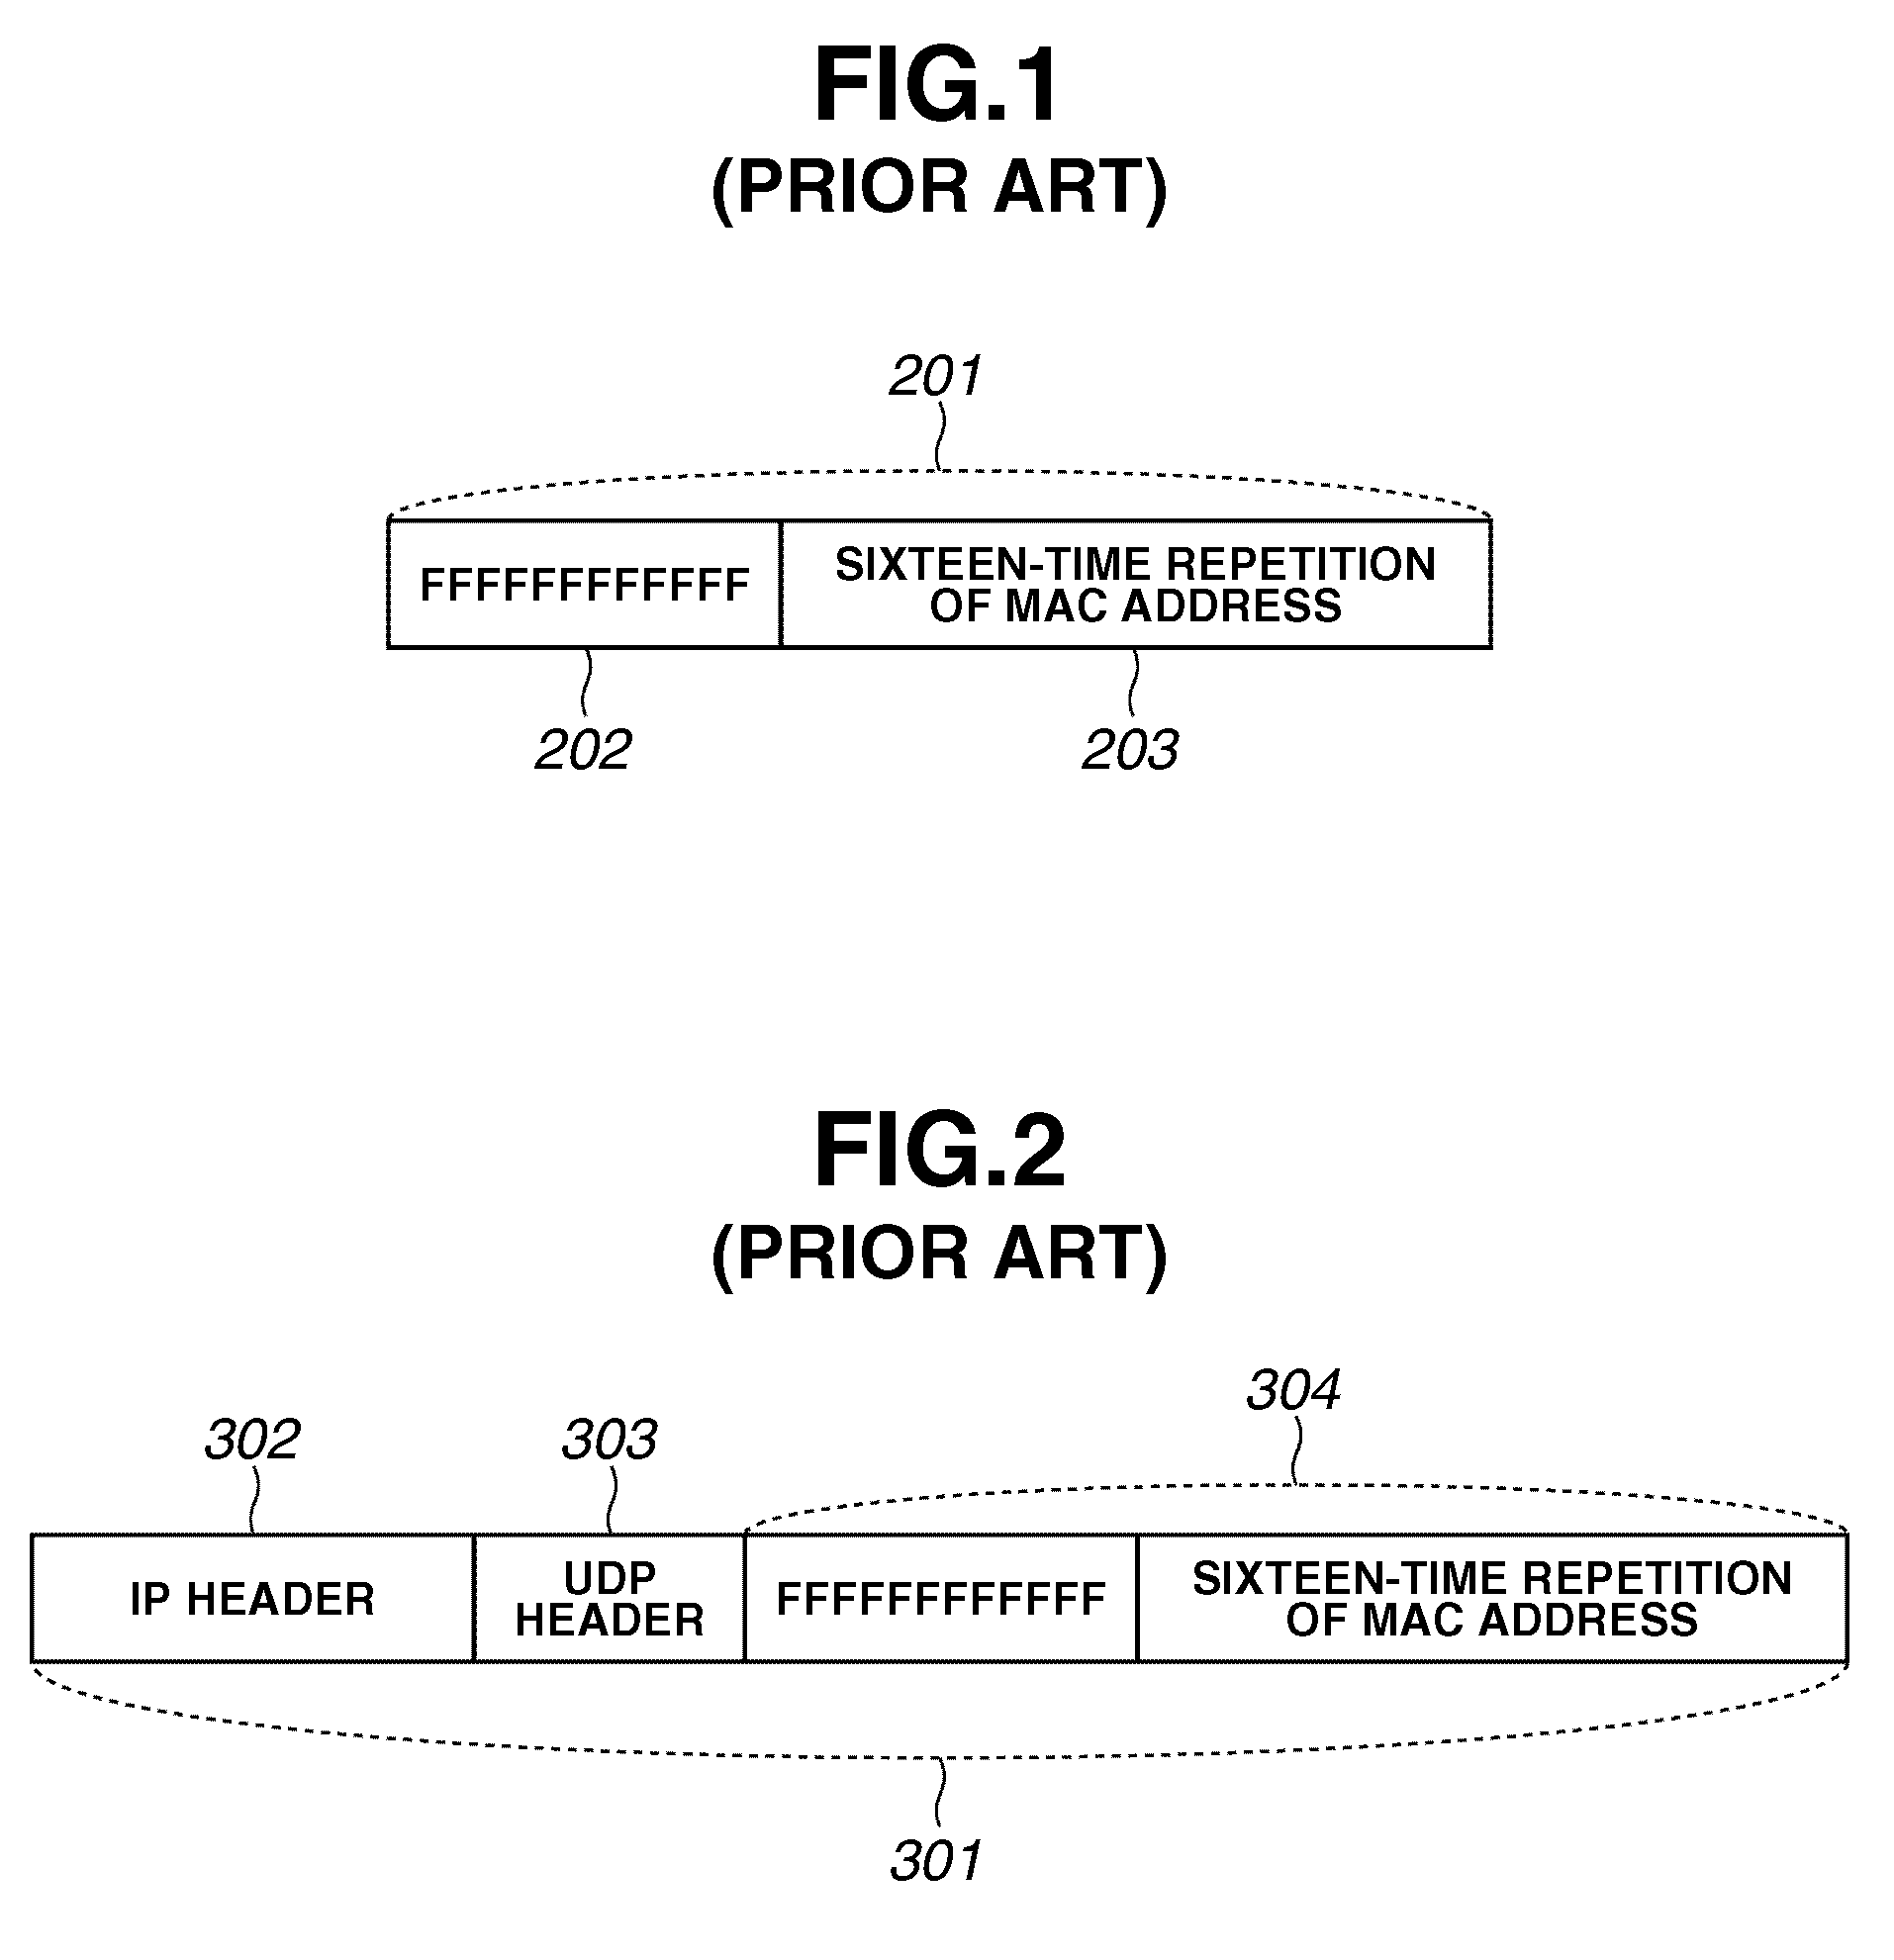 Information processing apparatus having communication function, and power control method therefor